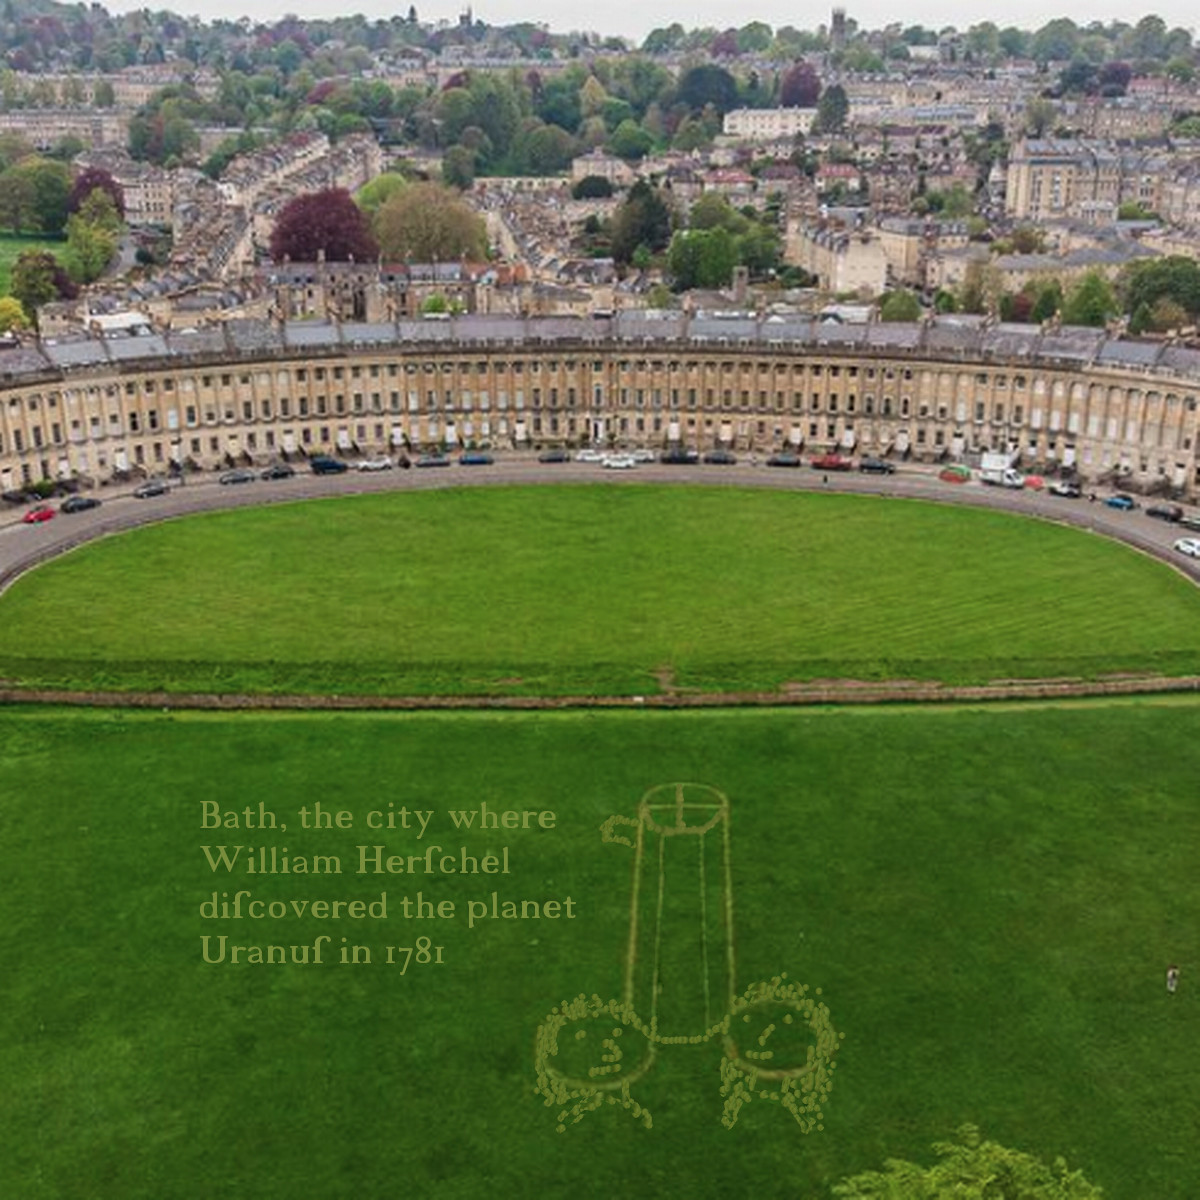 Grounds team may have come up with a solution to the recent graffiti on the lawn below the Bath's Royal Crescent 😉